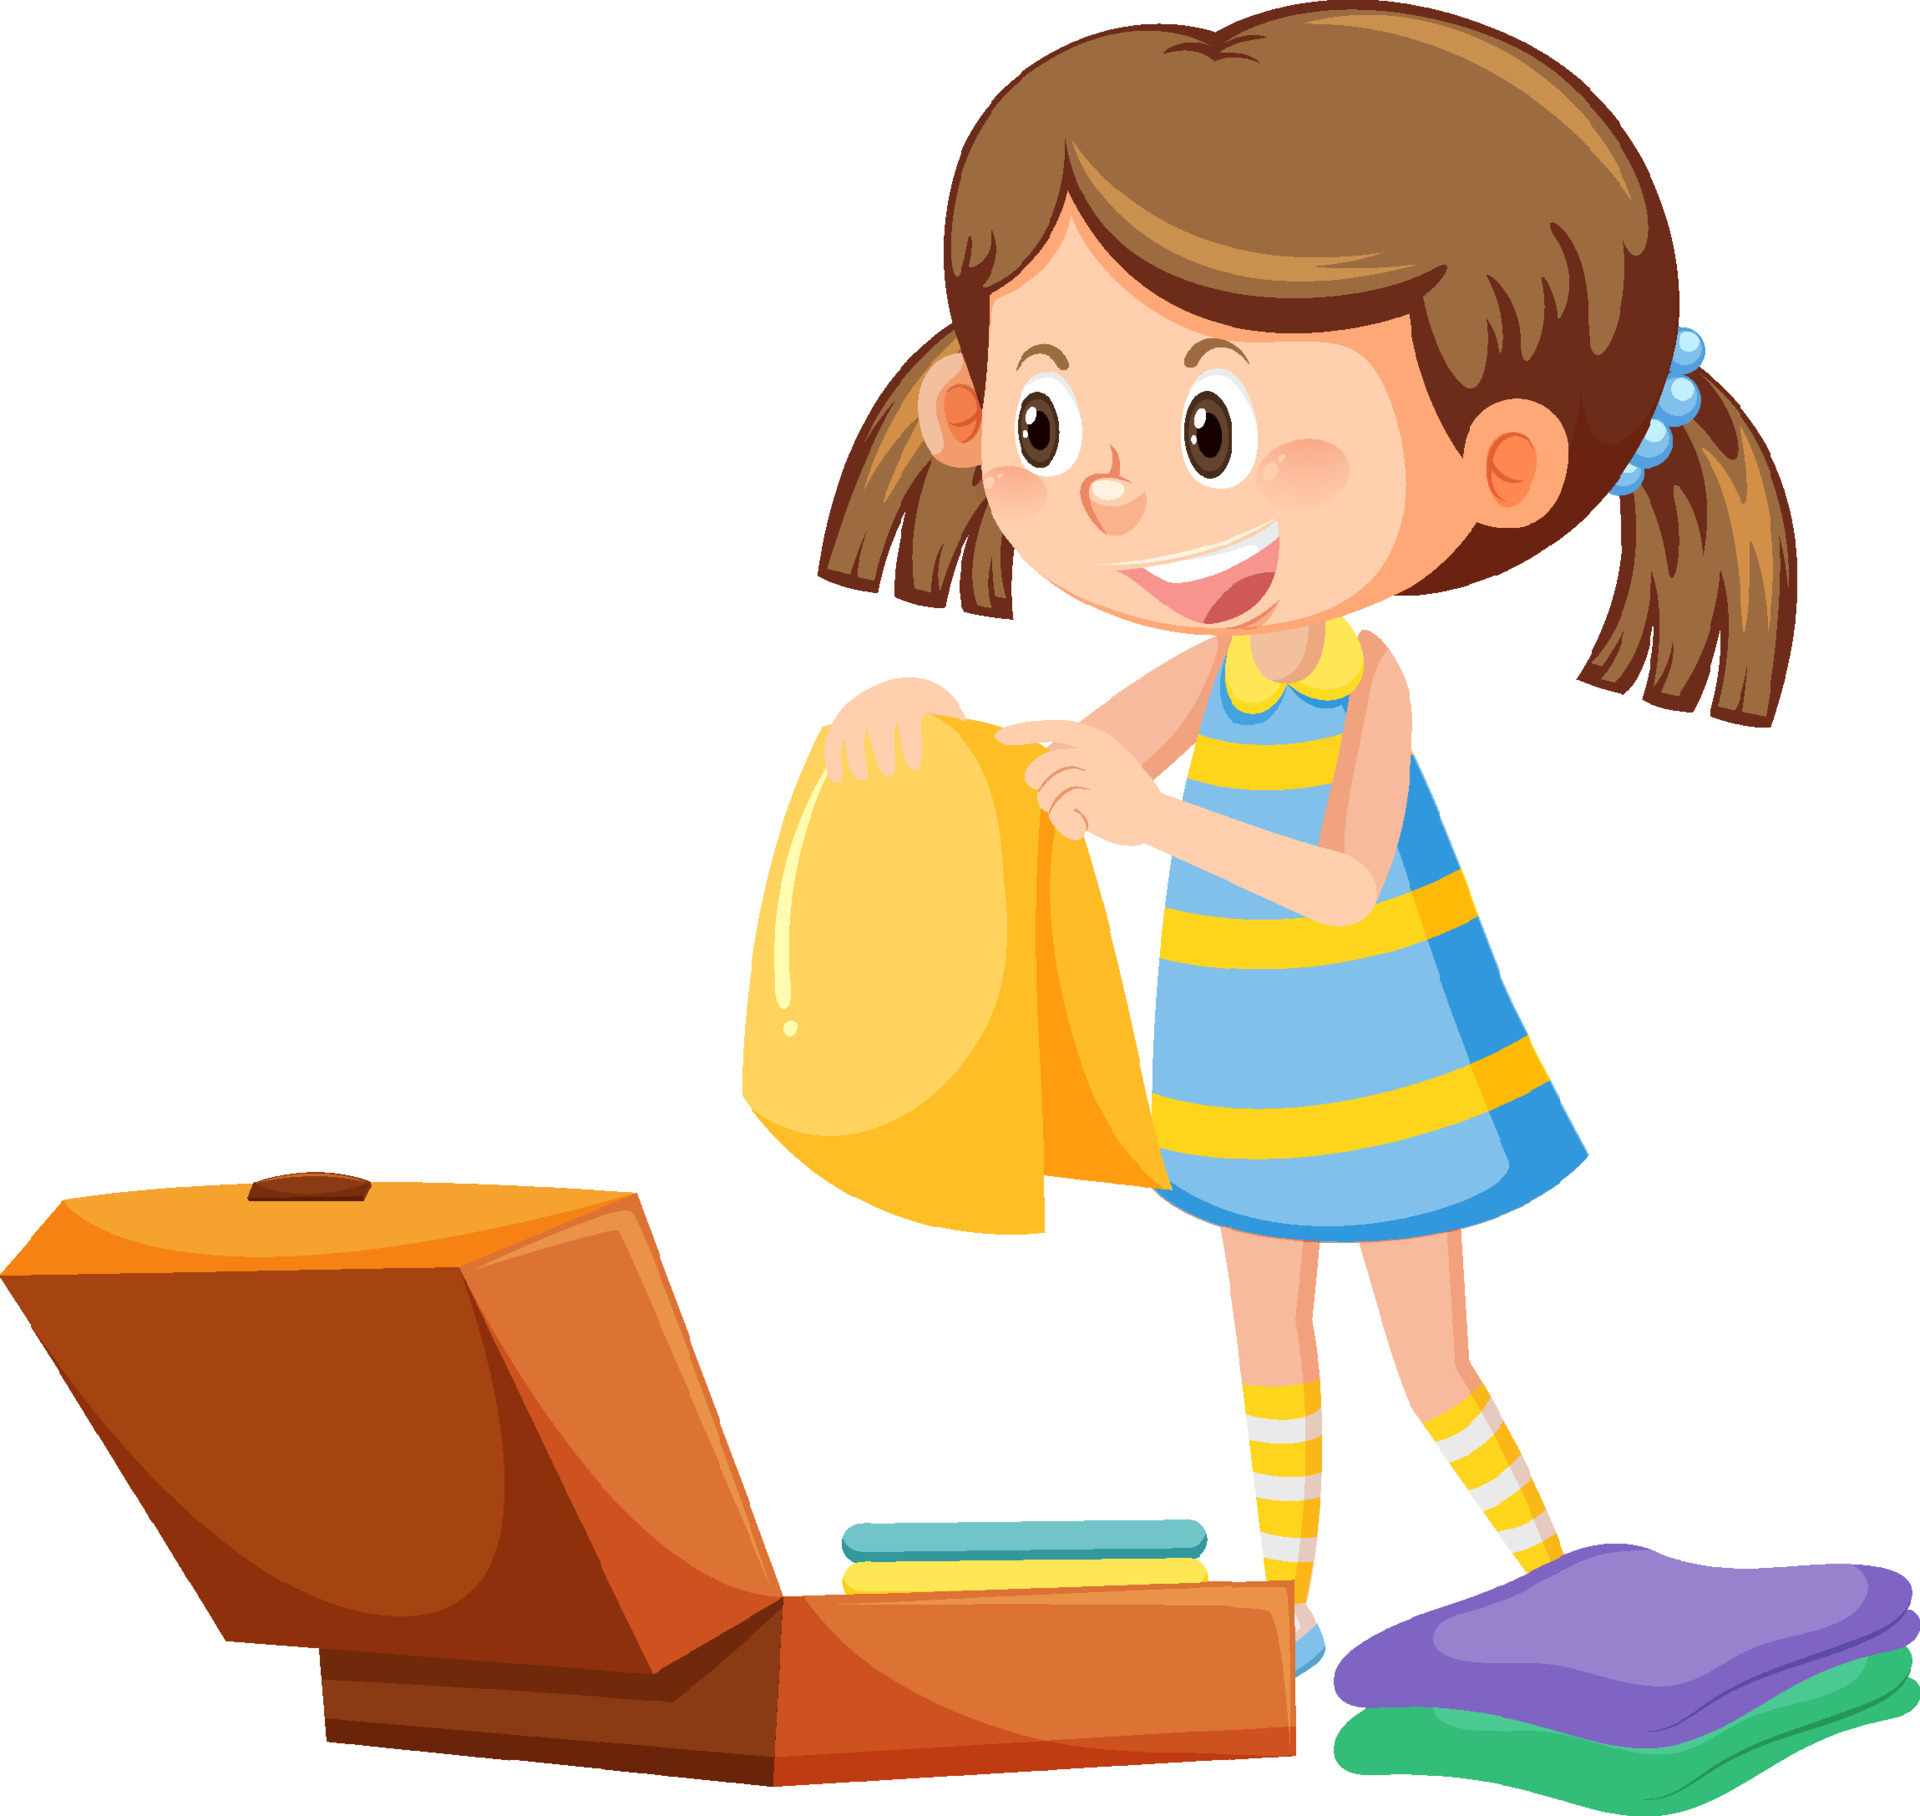 Illustration of a girl packing her suitcase to go on a trip or